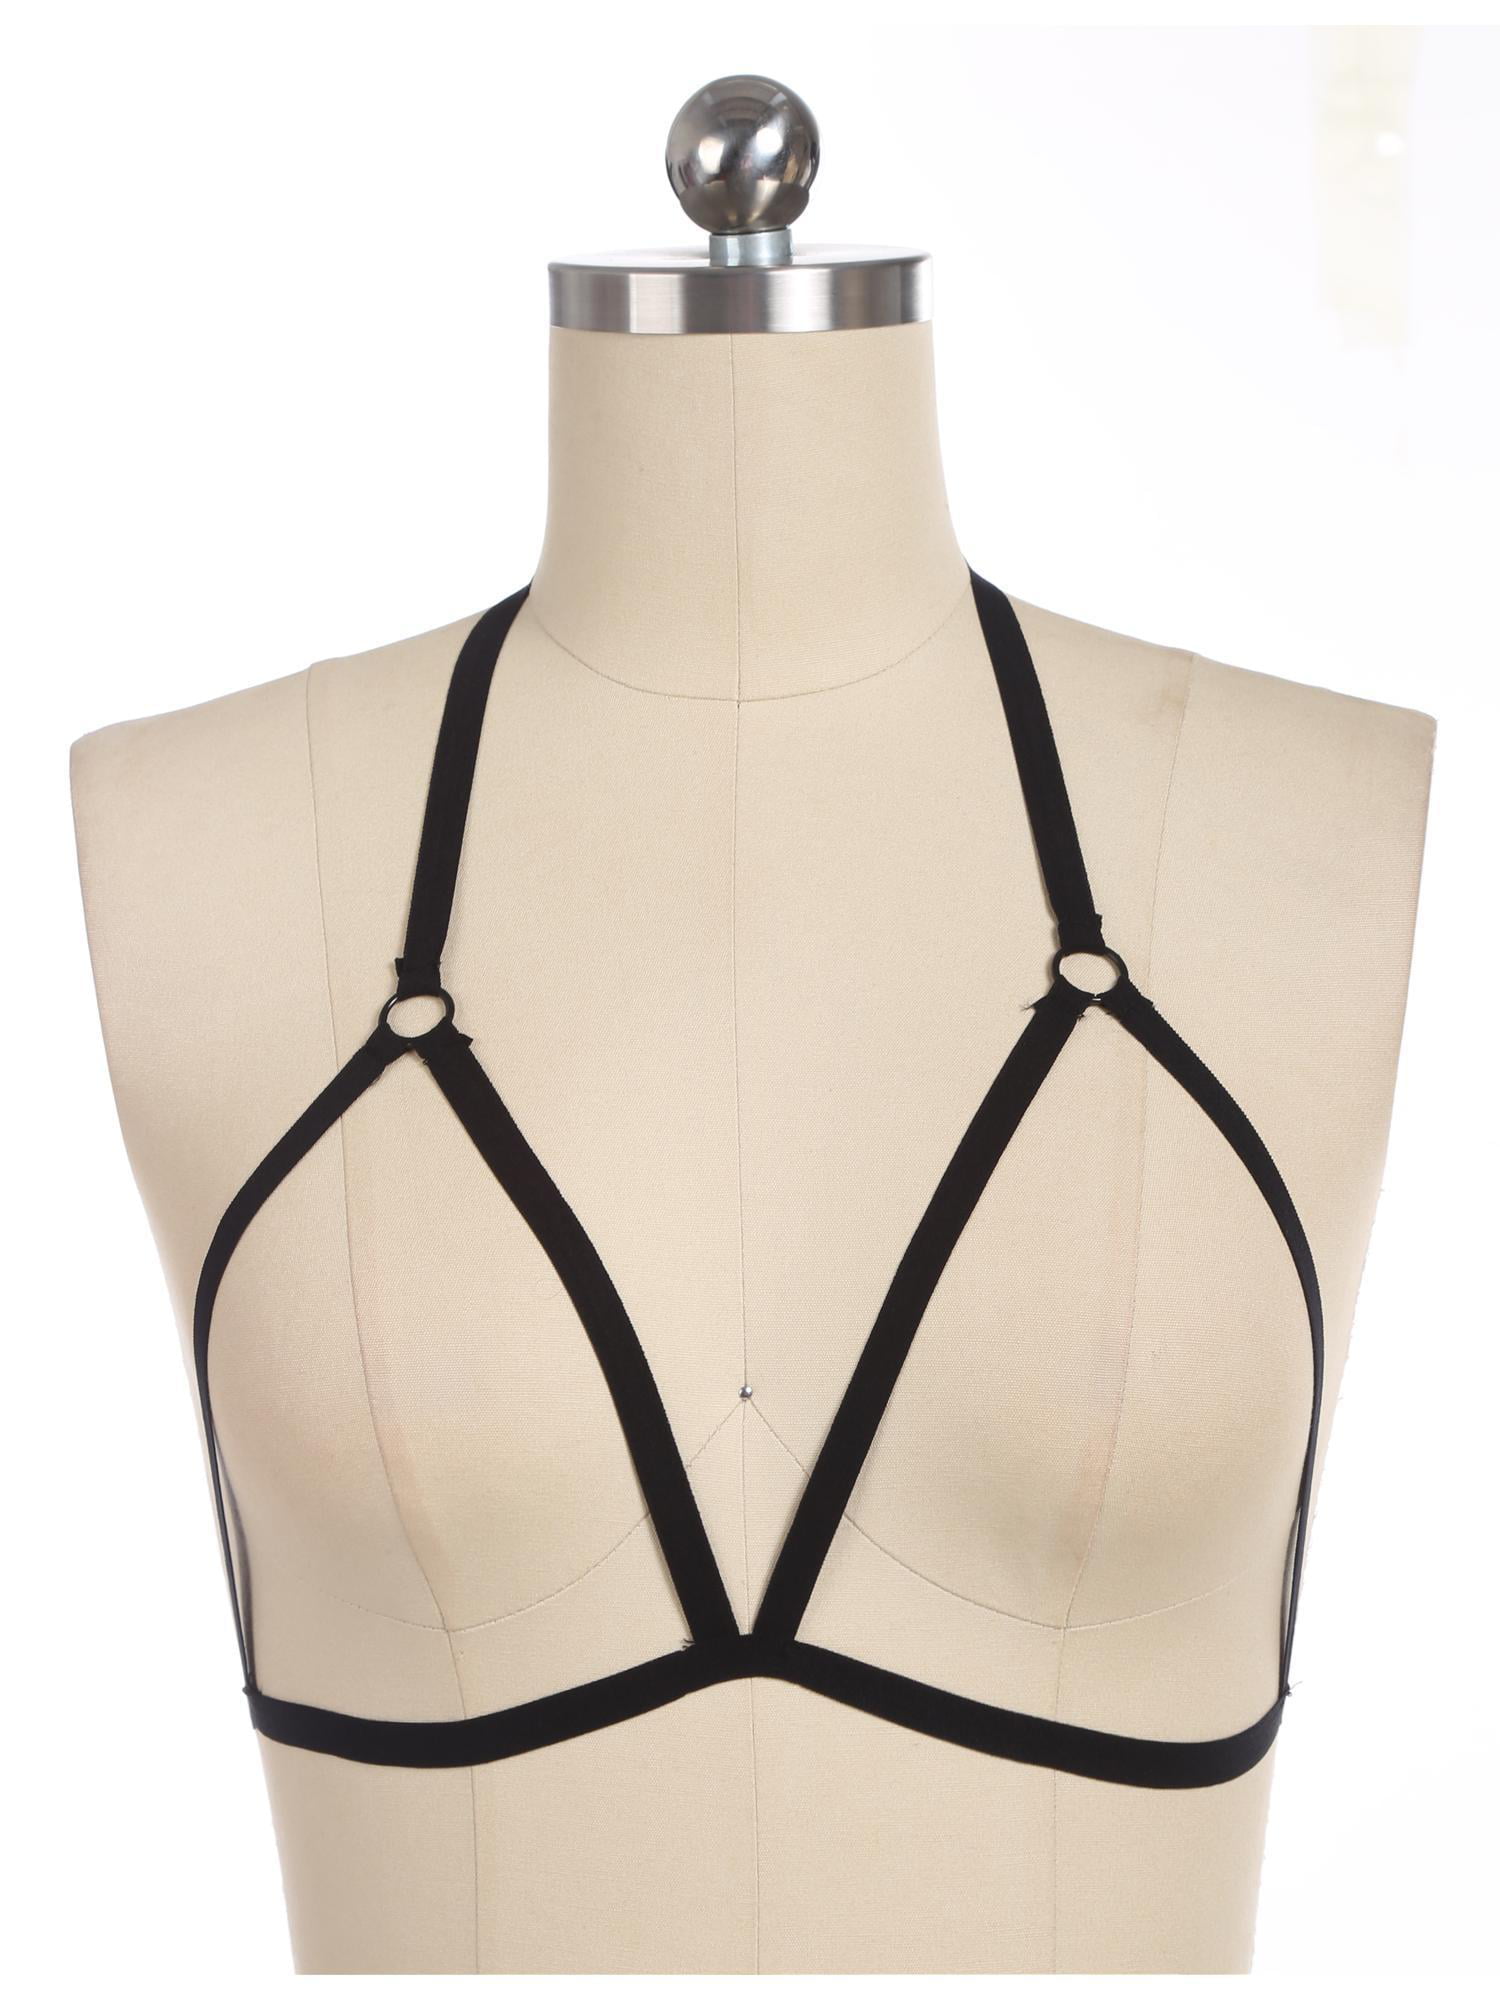 2019 Fashion Sexy Women Body Harness Plunge Low Cut Crop Top Style 